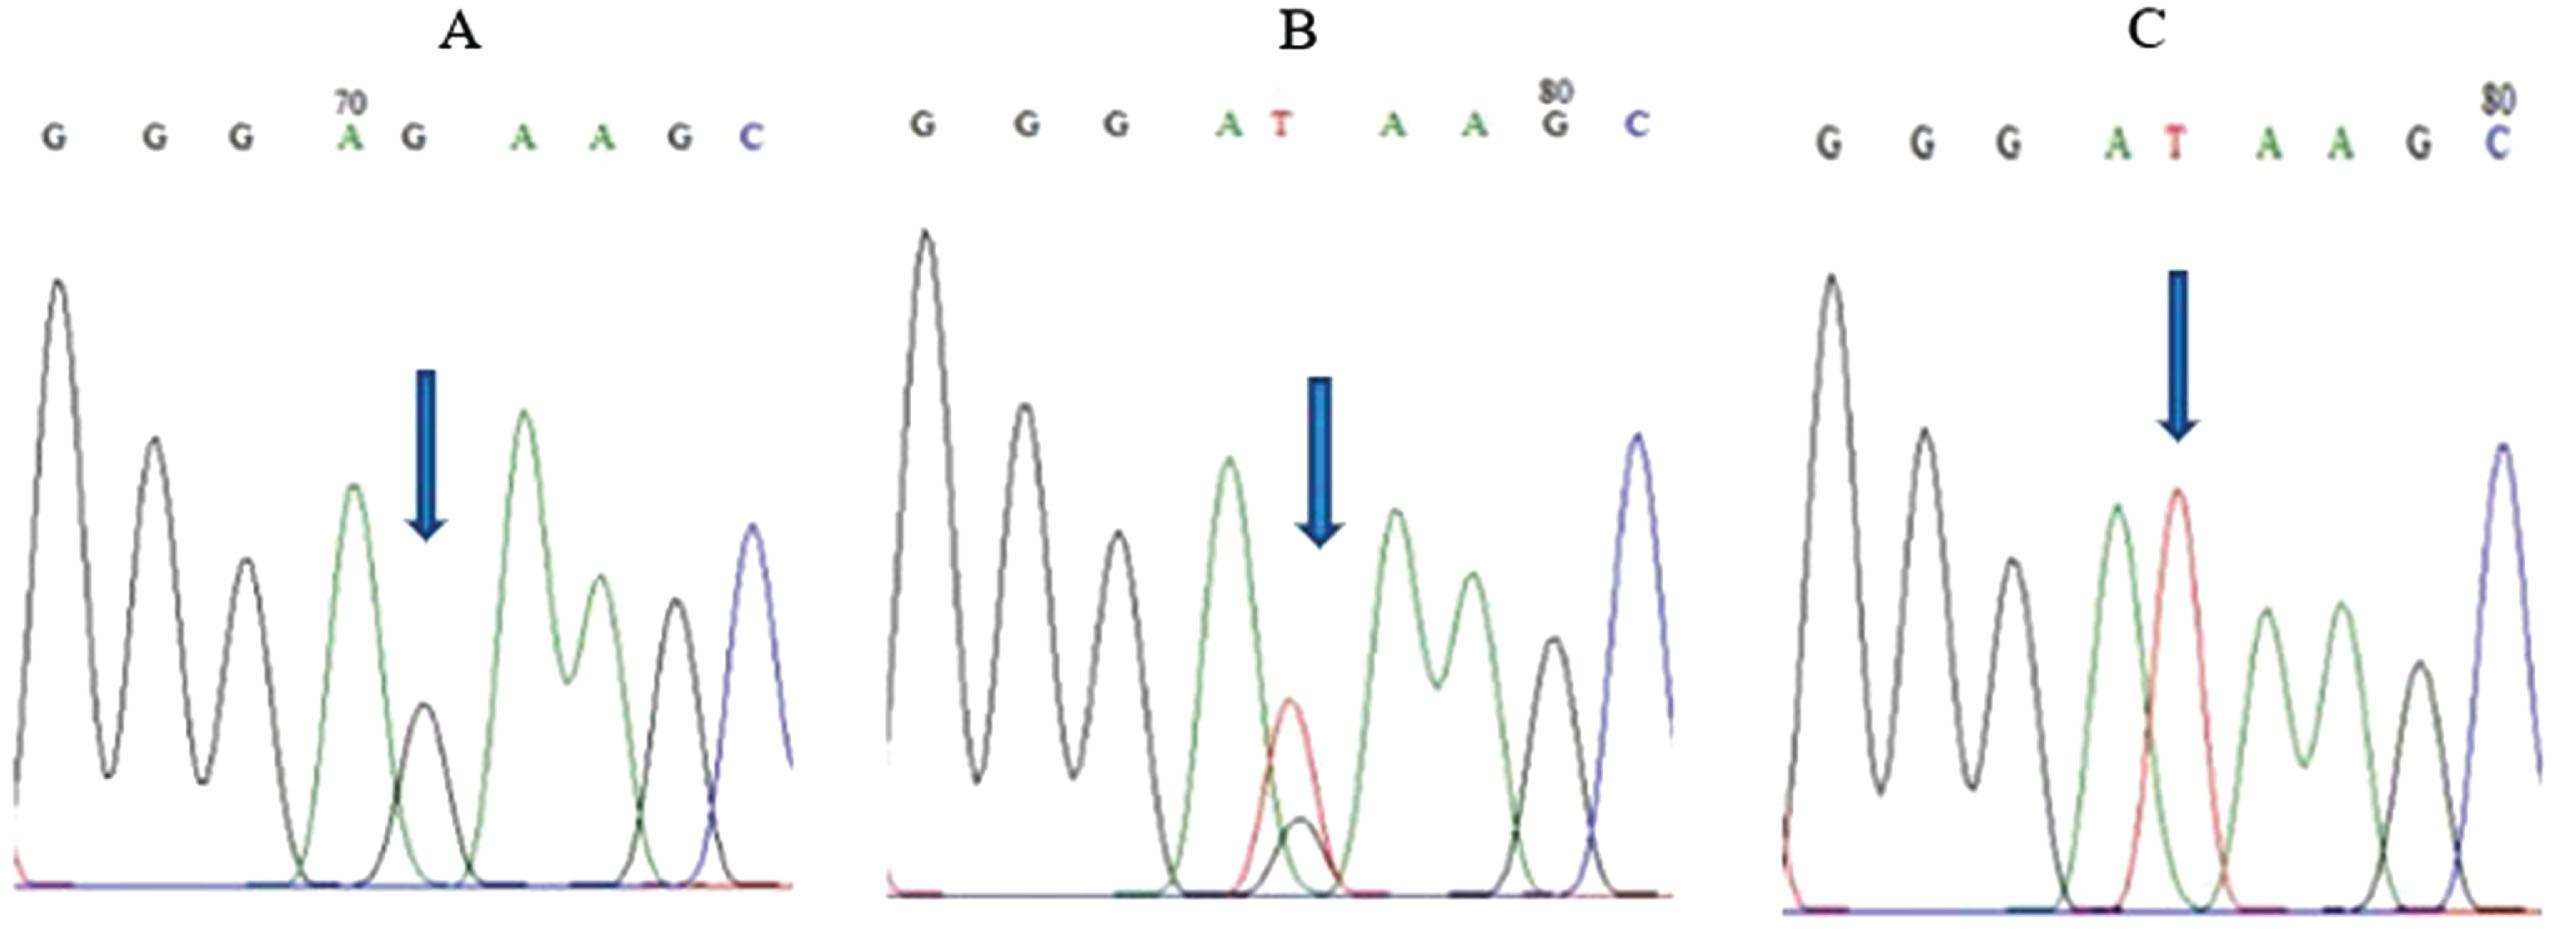 FOXO3 rs2802292 sequencing results. (A) GG homozygous genotype. (B) GT heterozygous genotype. (C) TT homozygous genotype.